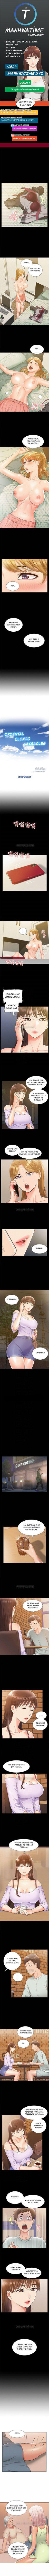 Panel Image 1 for chapter 15 of manhwa Oriental Clinic Miracles on read.oppai.stream